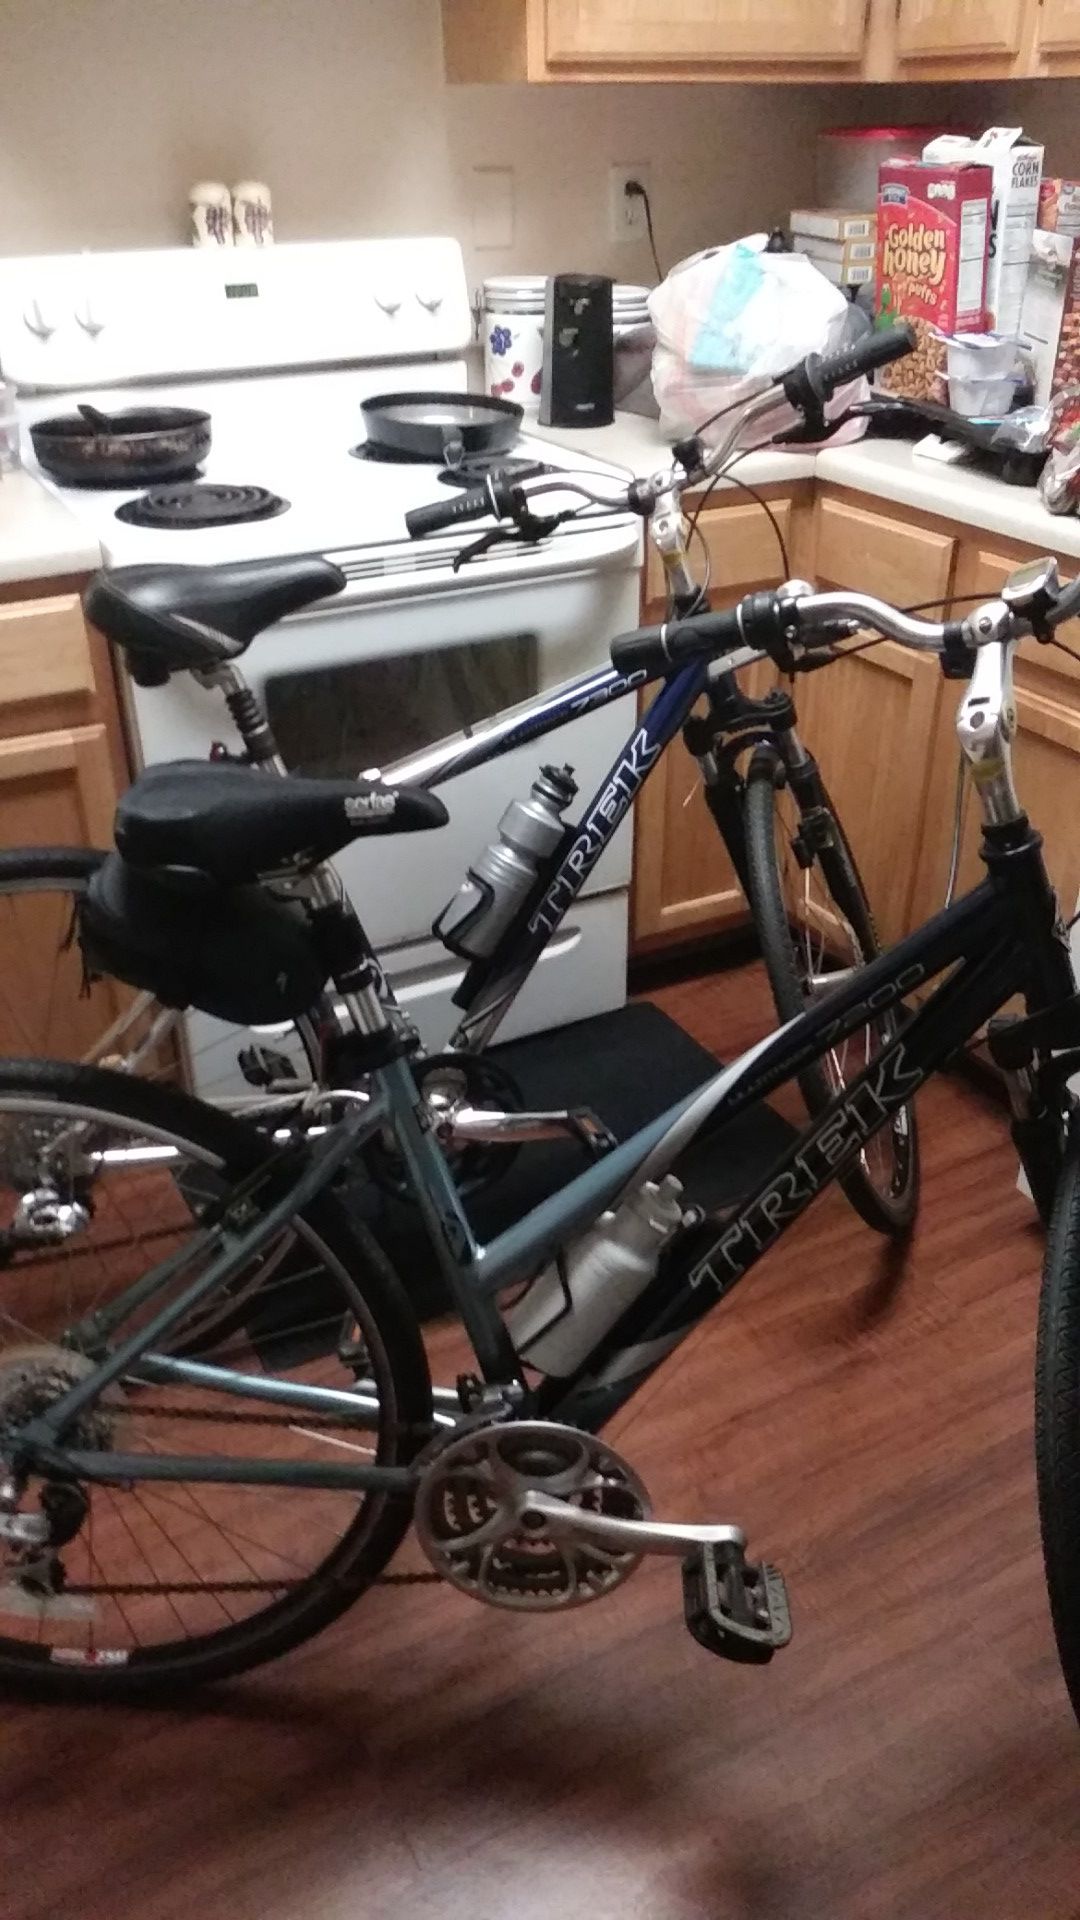 TREK GIRL AND BOY BIKES ONLY BEEN RIDING A FEW TIMES GET THEM IN TIME FOR XMAS GREAT GIFT ONLY 200 DOLLARS EACH